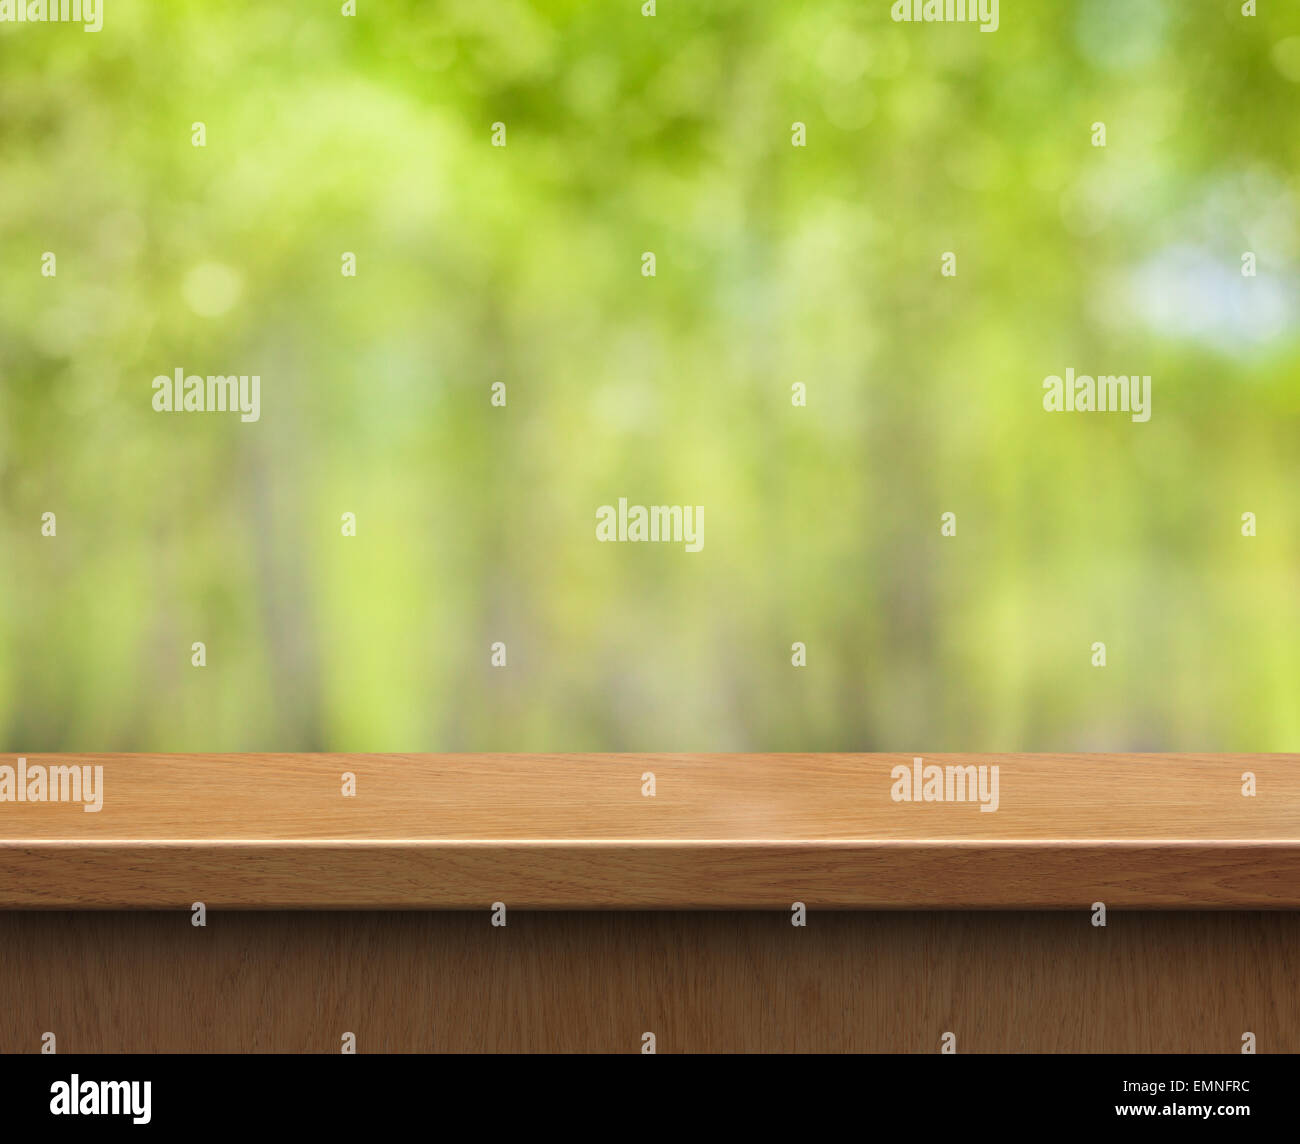 empty wood table for product display on green blurred background Stock Photo